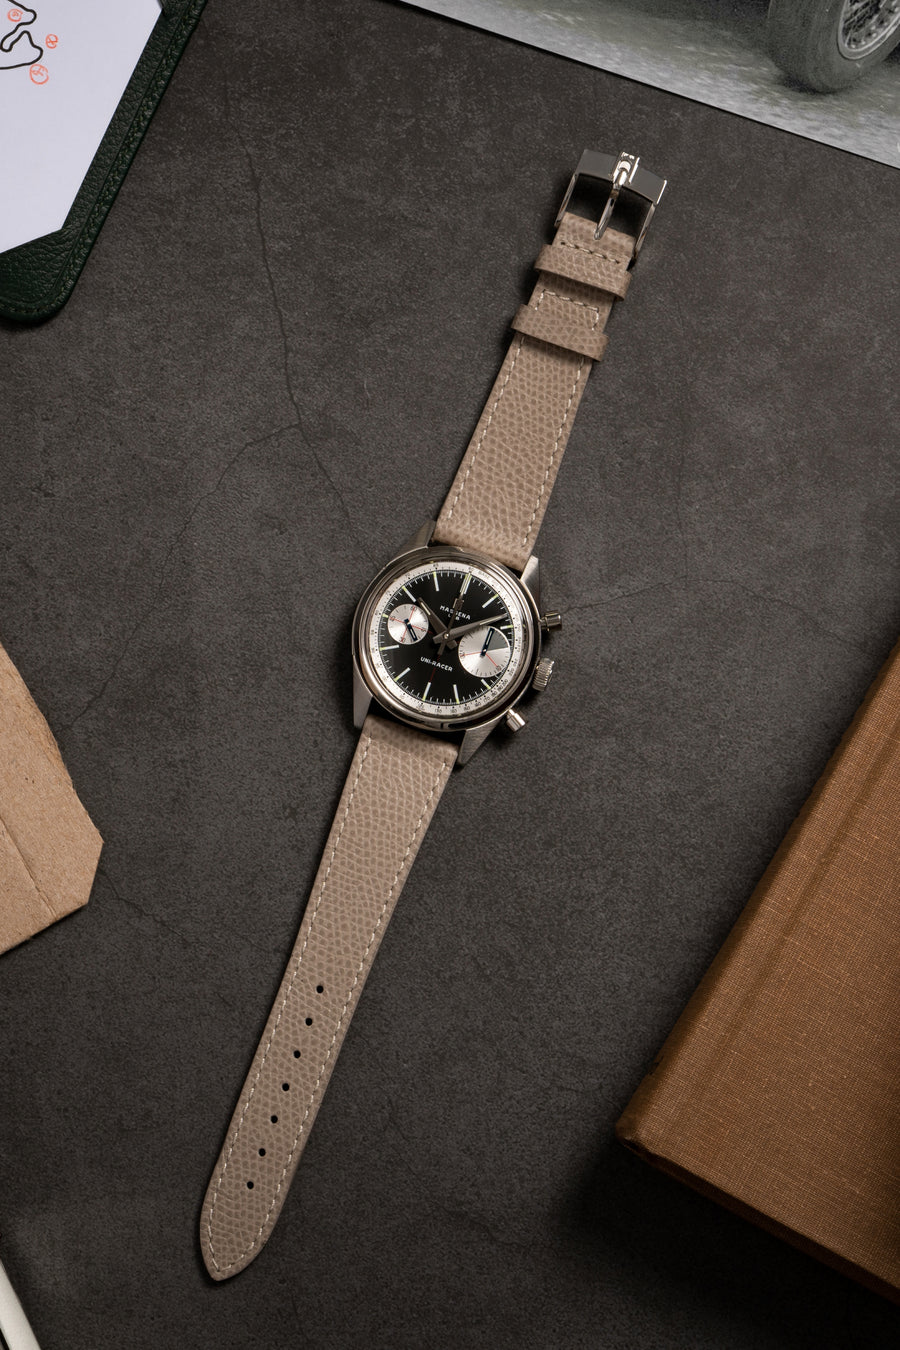 Three years in the making, the Massena LAB Uni-Racer wristwatch is a testament to the art of defying the rules and creating a timepiece informed by the past, but with a “Big Eye”on the present.